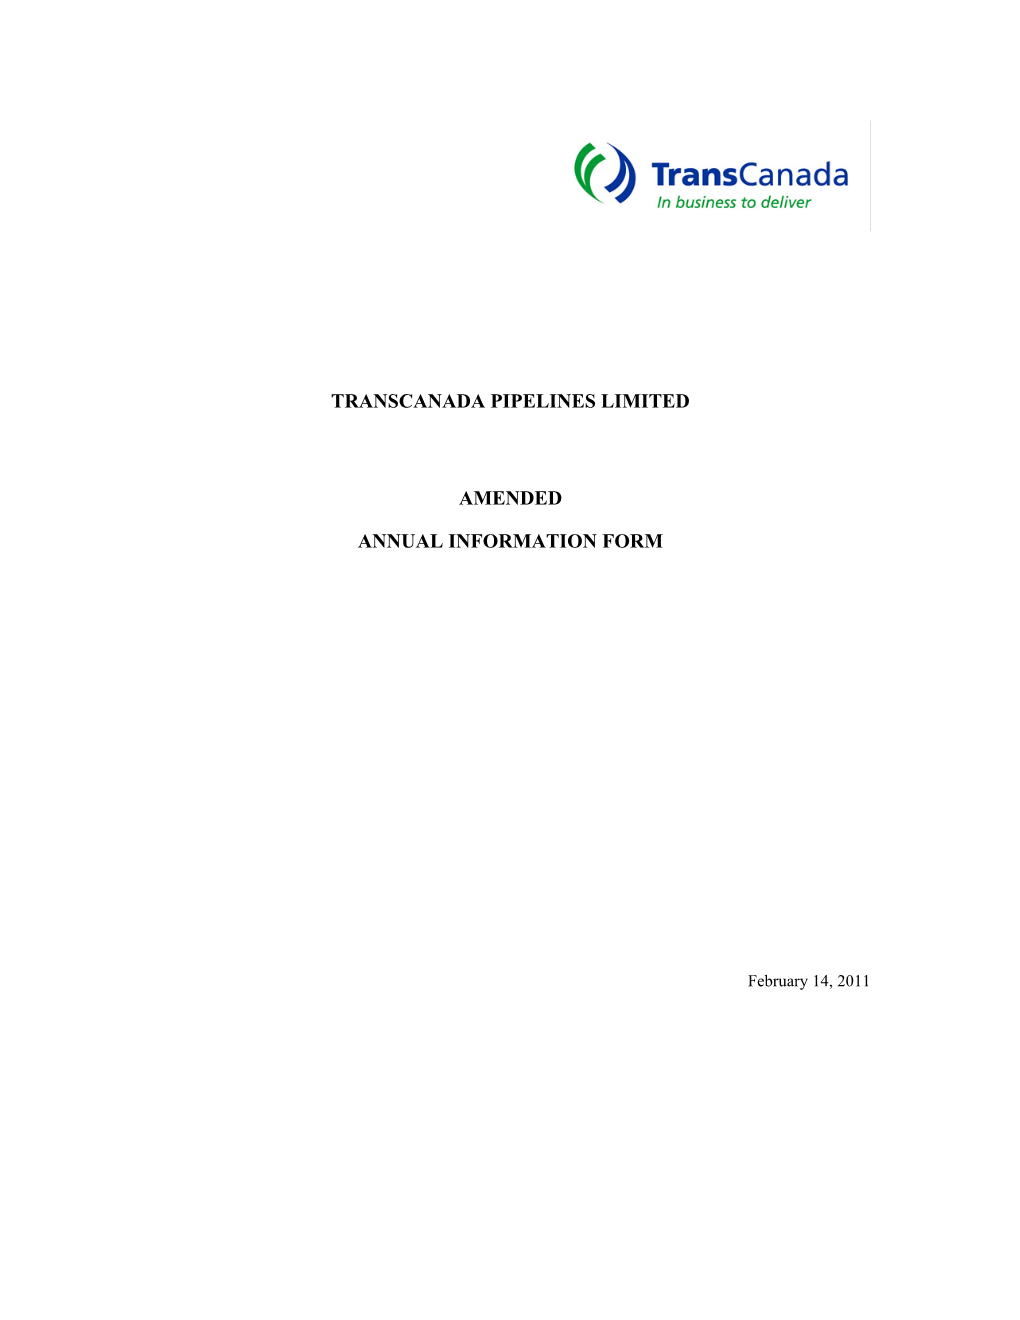 Transcanada Pipelines Limited Amended Annual